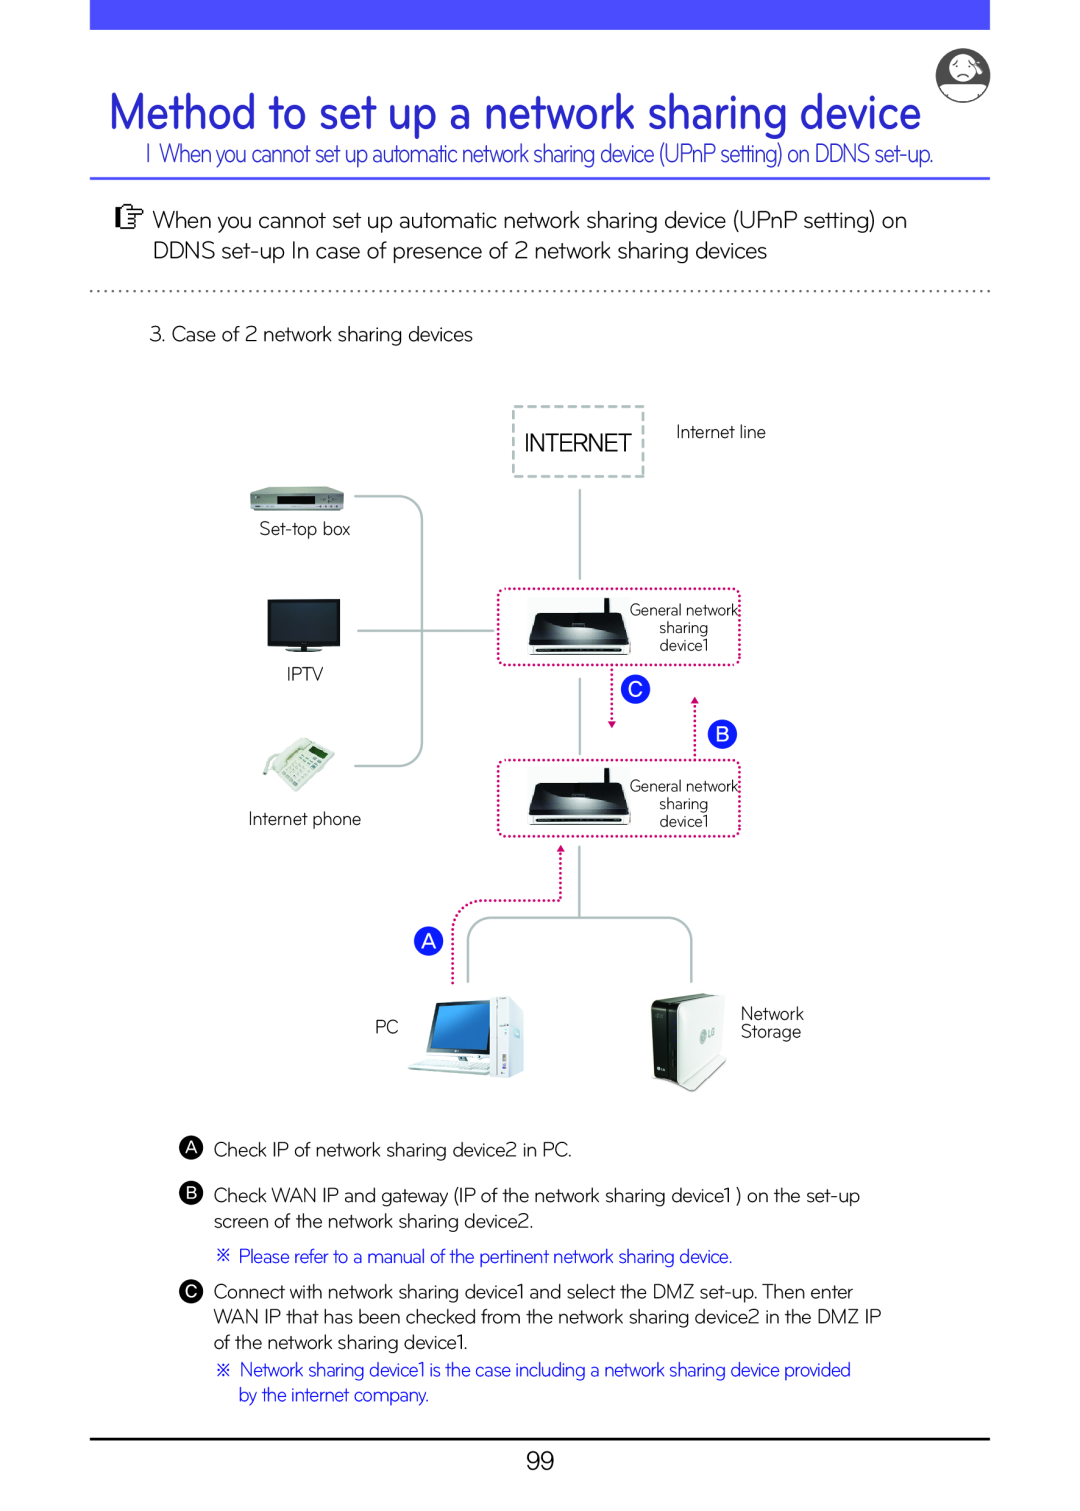 LG Electronics N1T1, N2R5, N1A1, N2A2, N1T3, N2B5 Case of 2 network sharing devices, Method to set up a network sharing device 